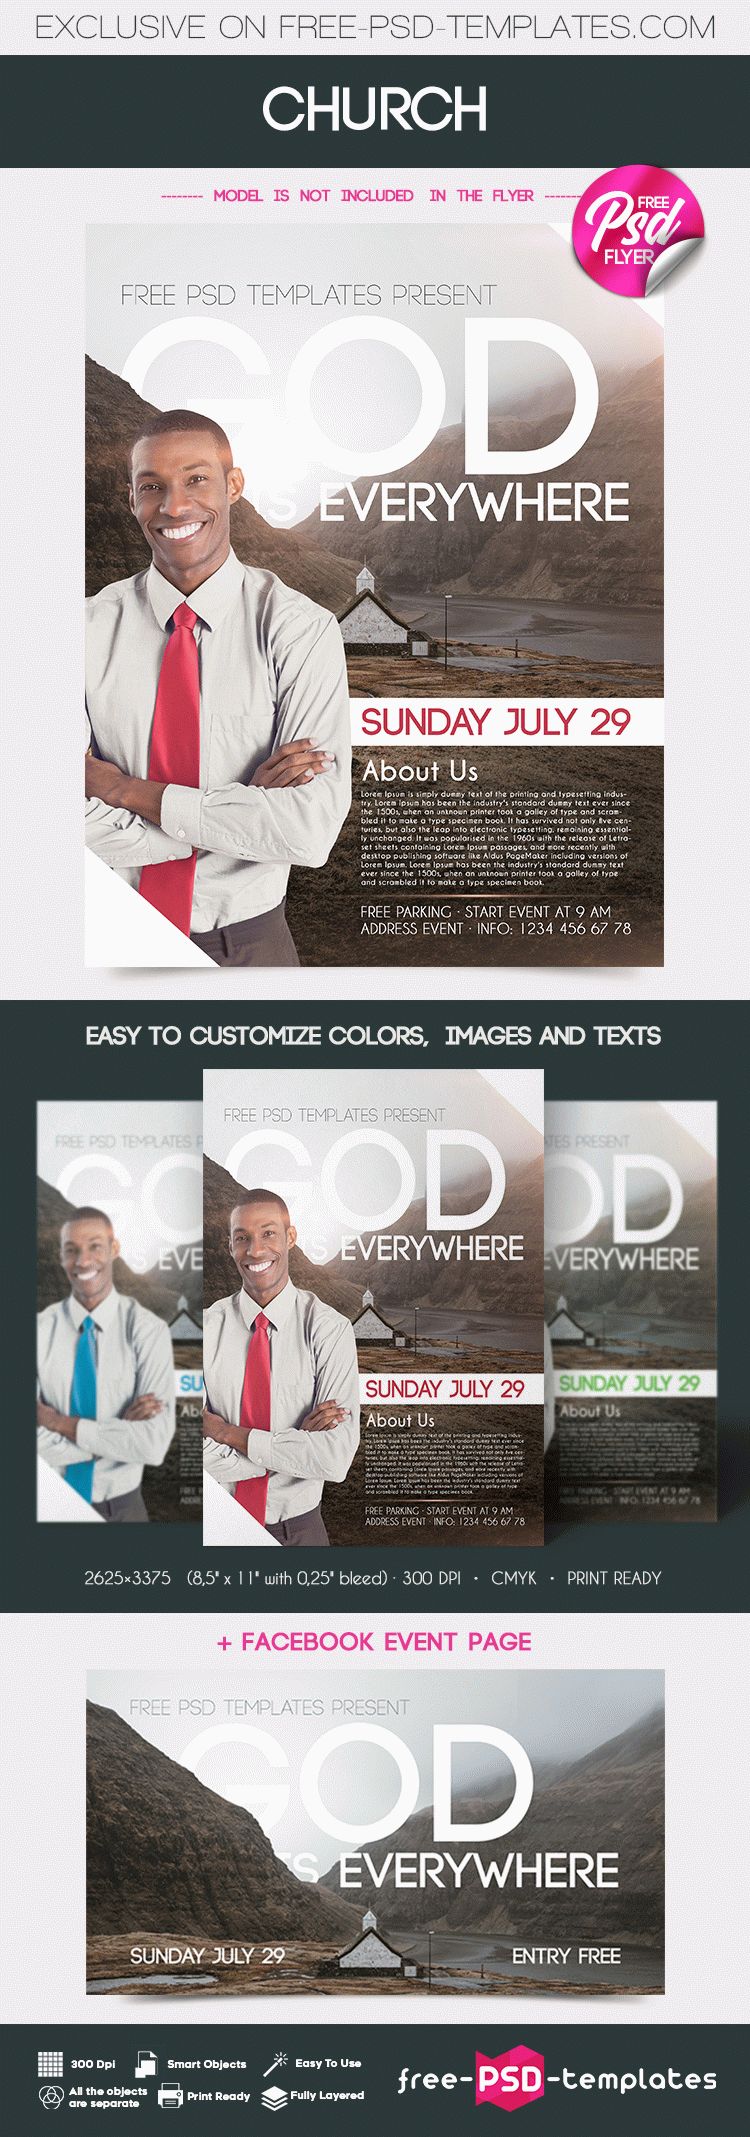 Free Church Flyer in PSD  Free PSD Templates Regarding Free Church Flyer Templates Download